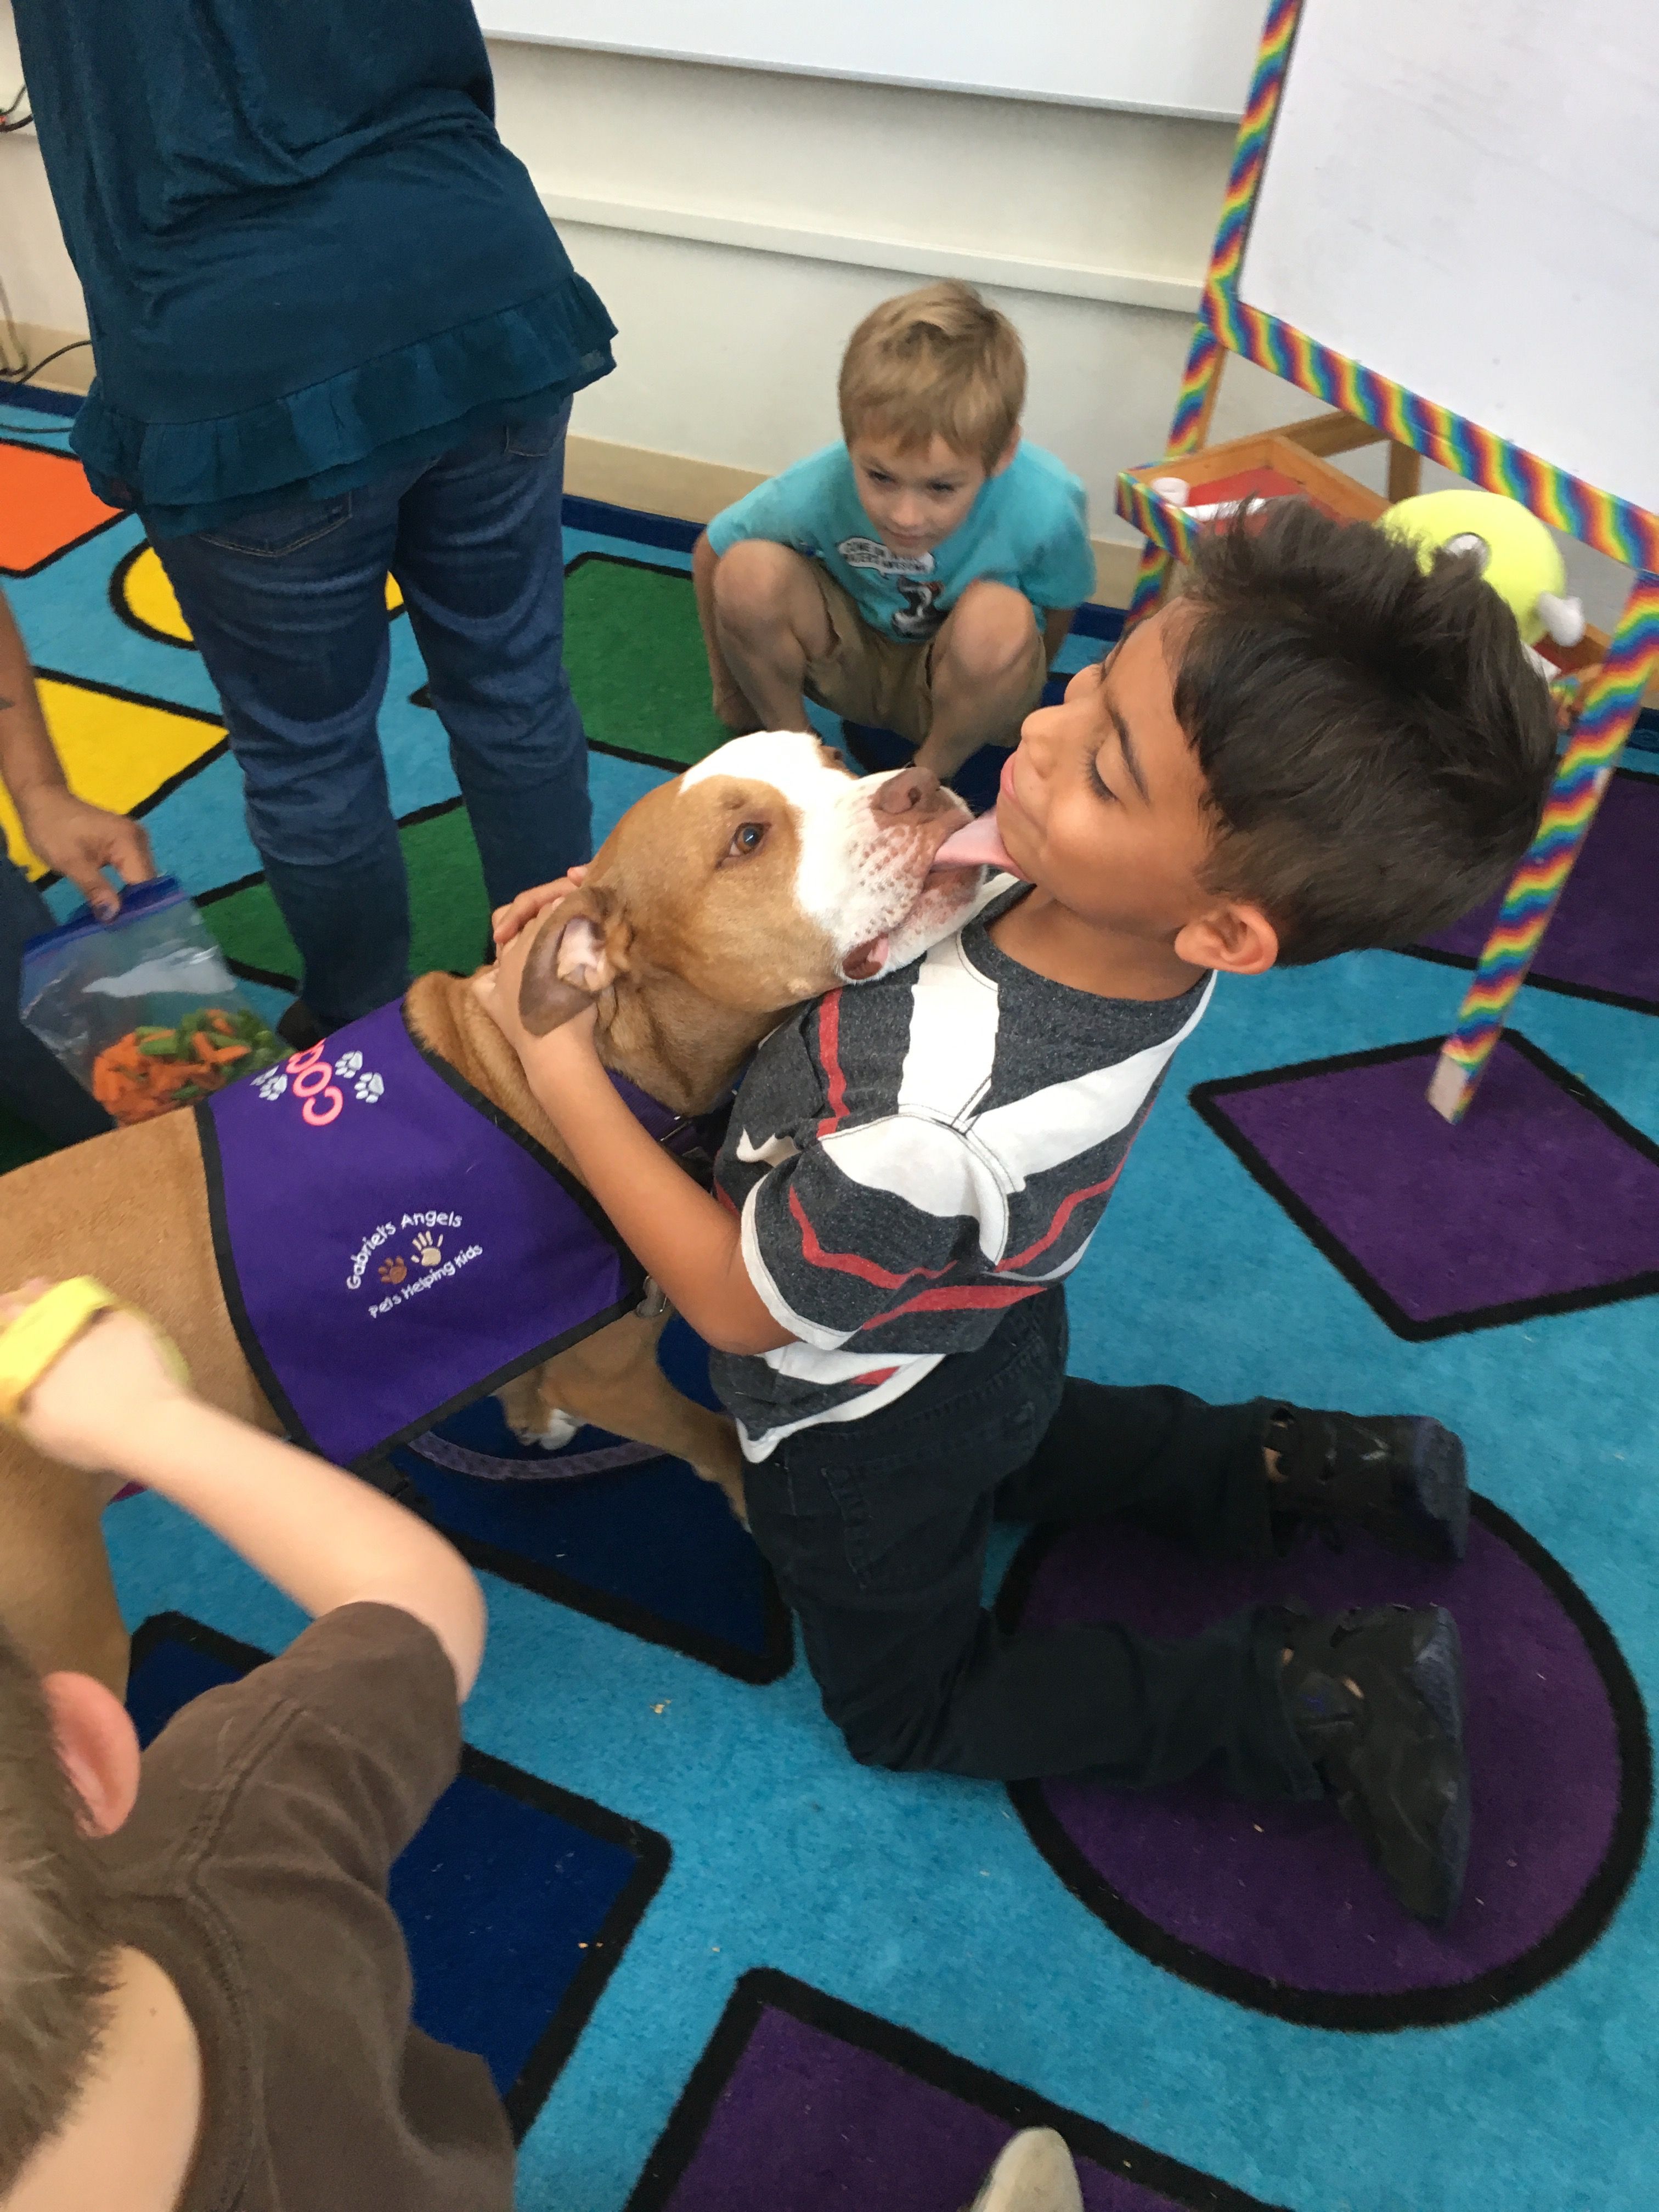 friendly dog surrounded by children, licking one child's face